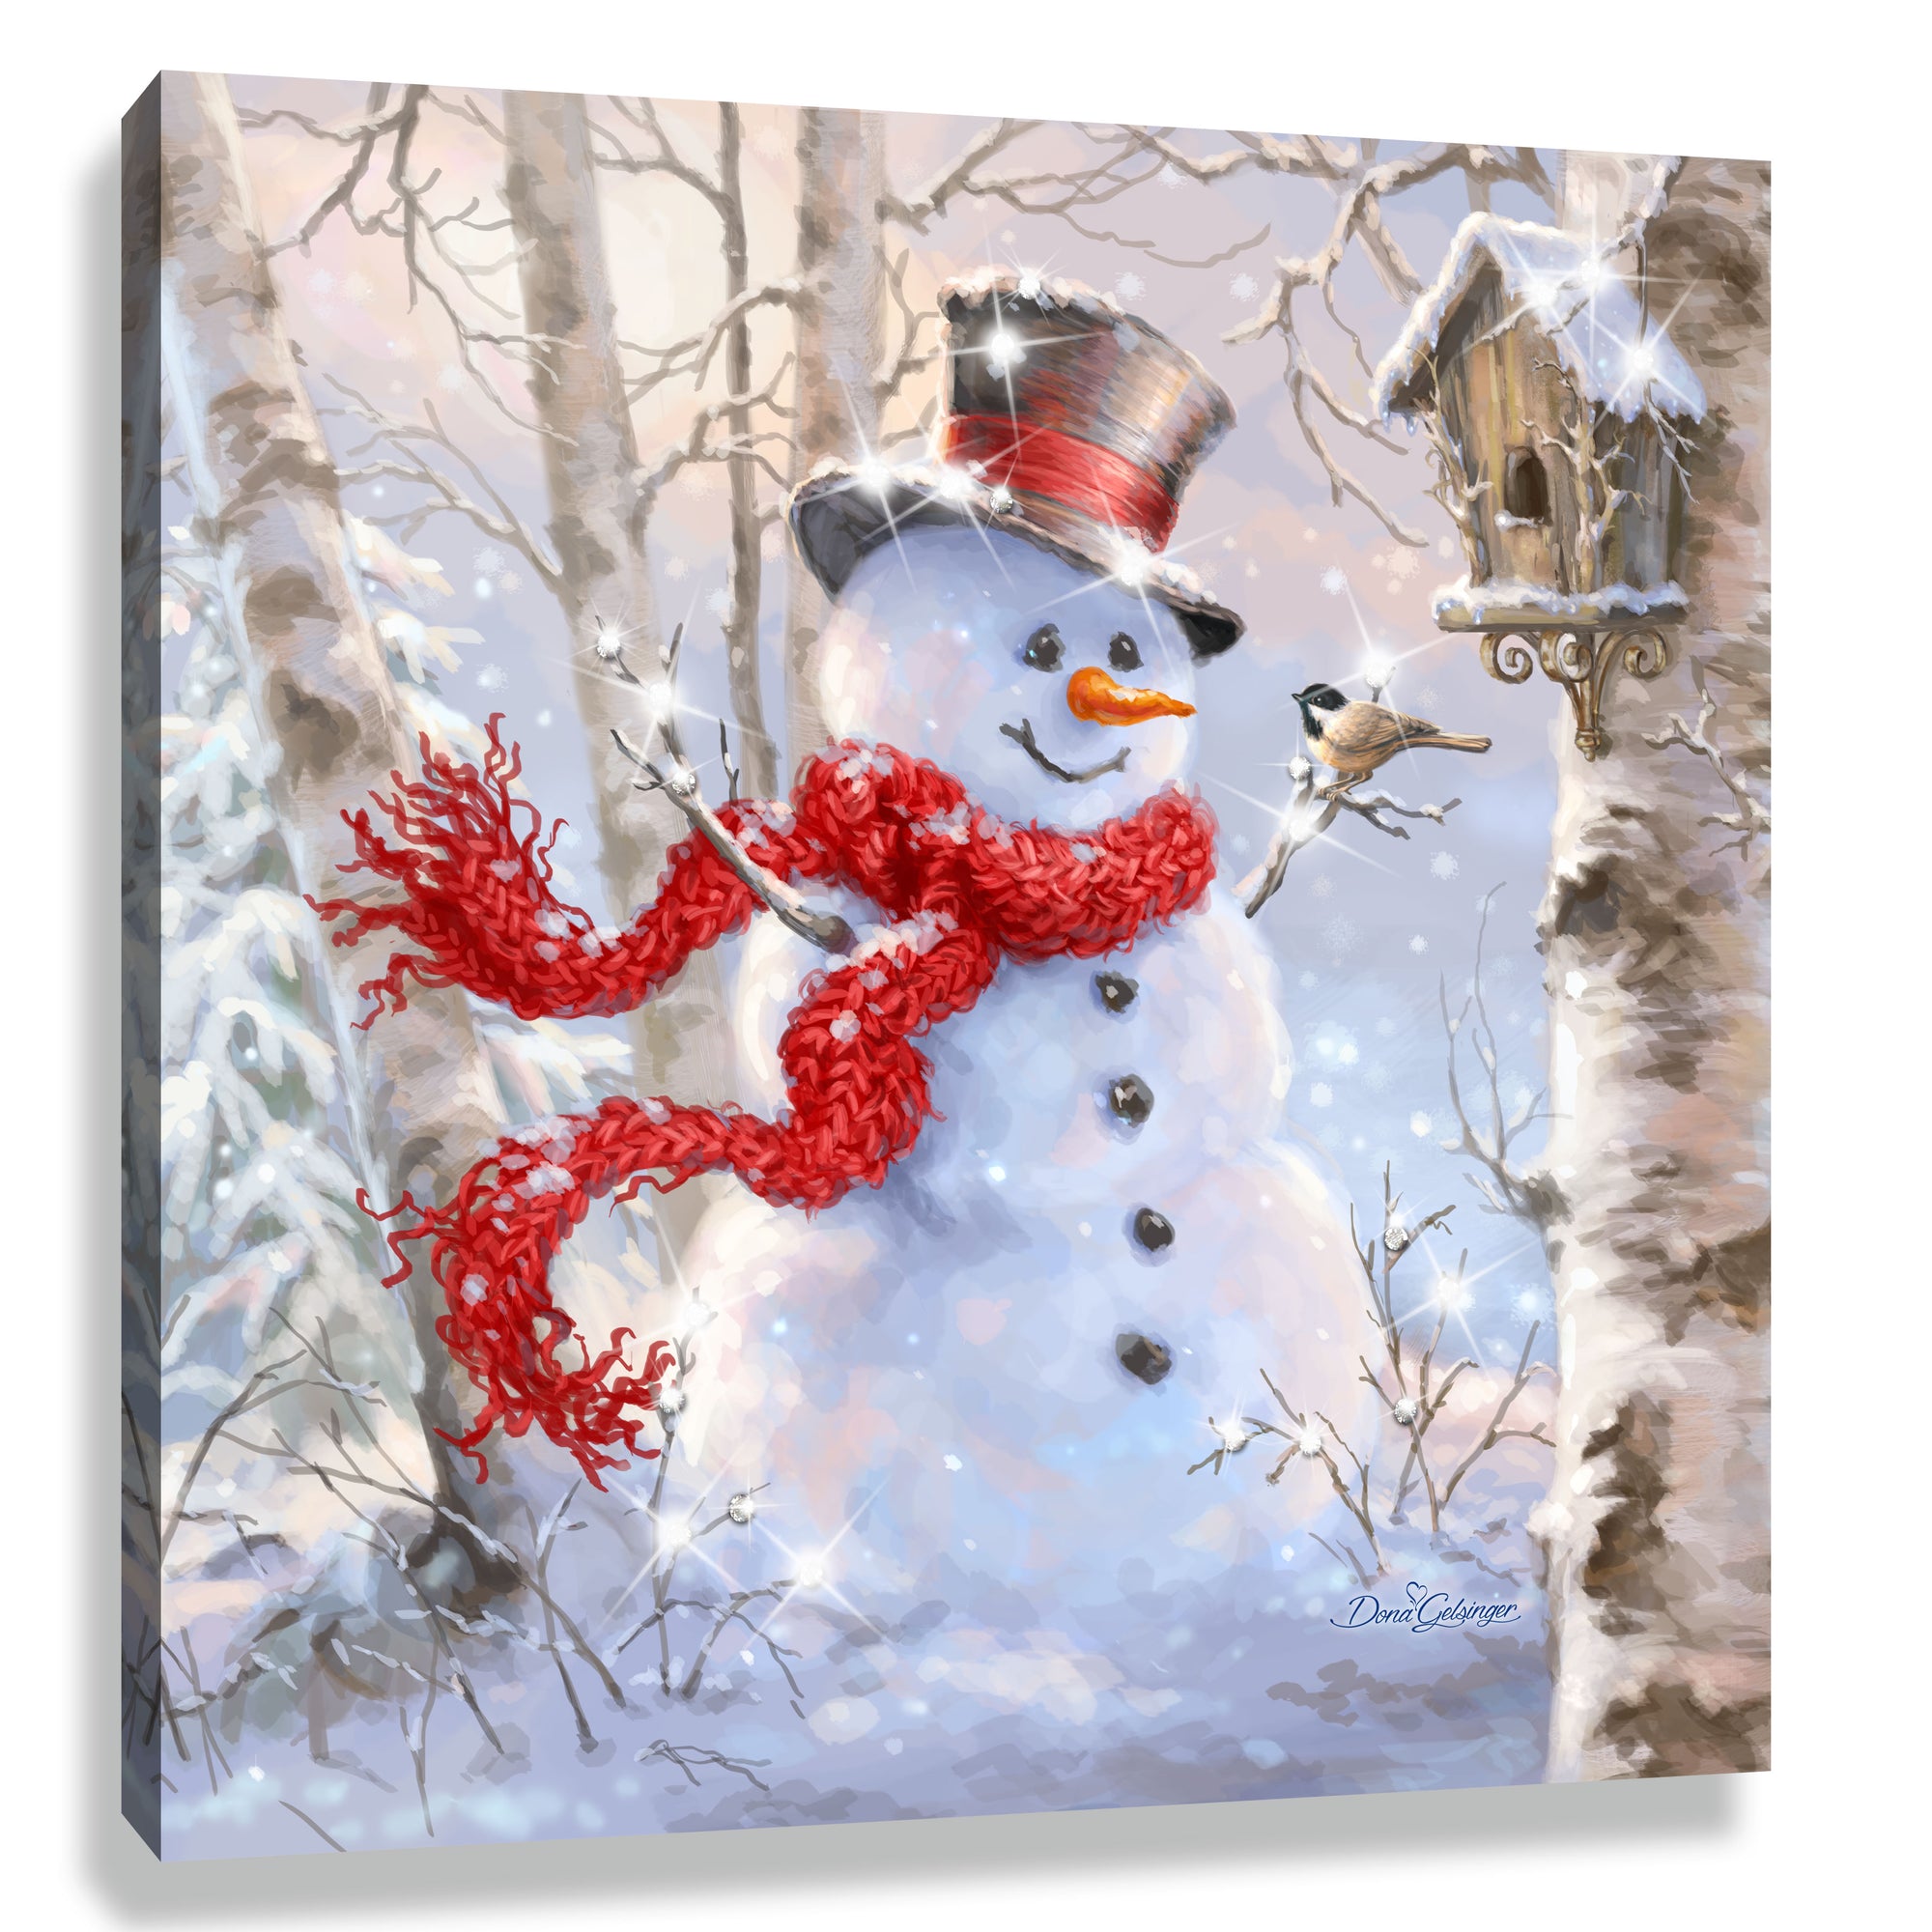 Birch Forest Snowman Pizazz Print with Dazzling Crystals. Snowman in the woods with a bird and birdhouse.